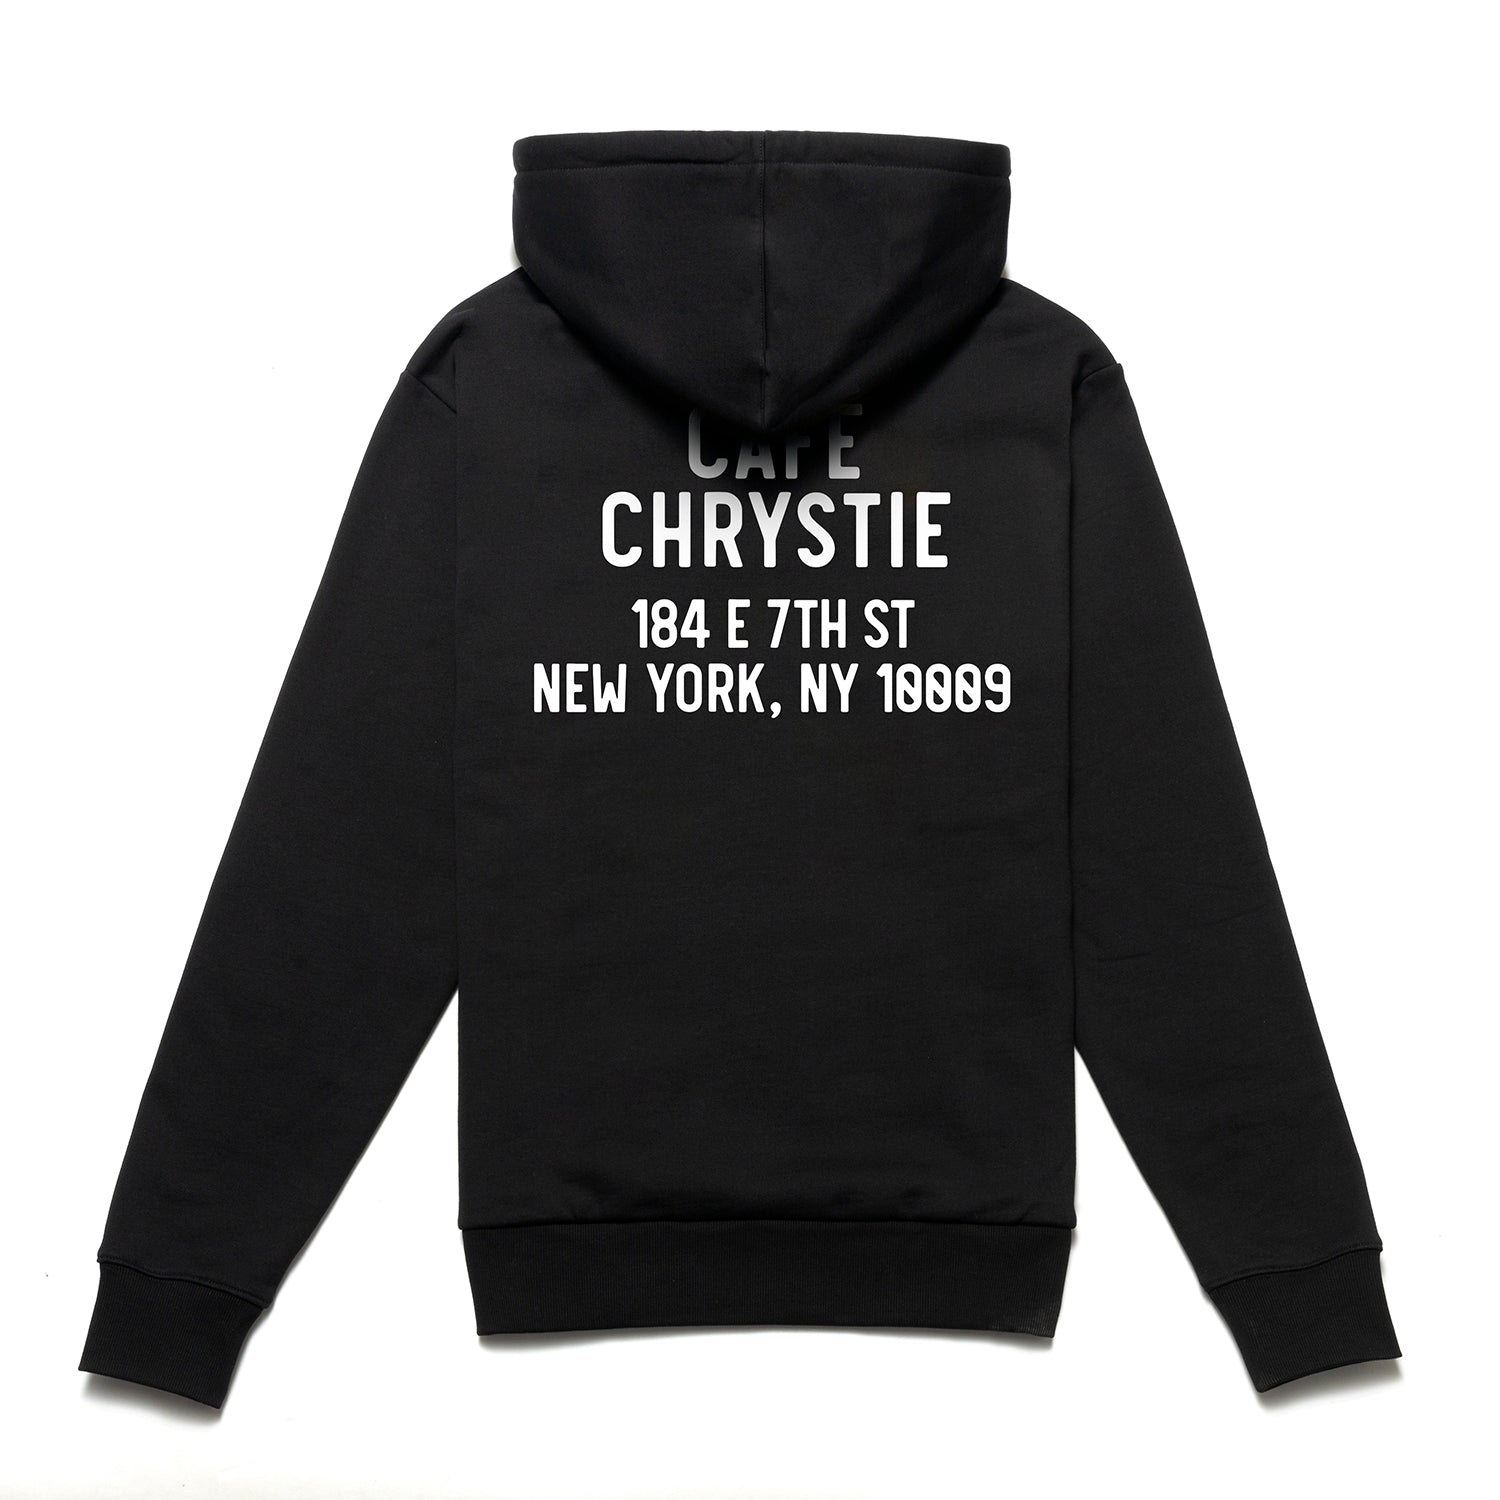 Load image into Gallery viewer, Café Chrystie pullover sweater